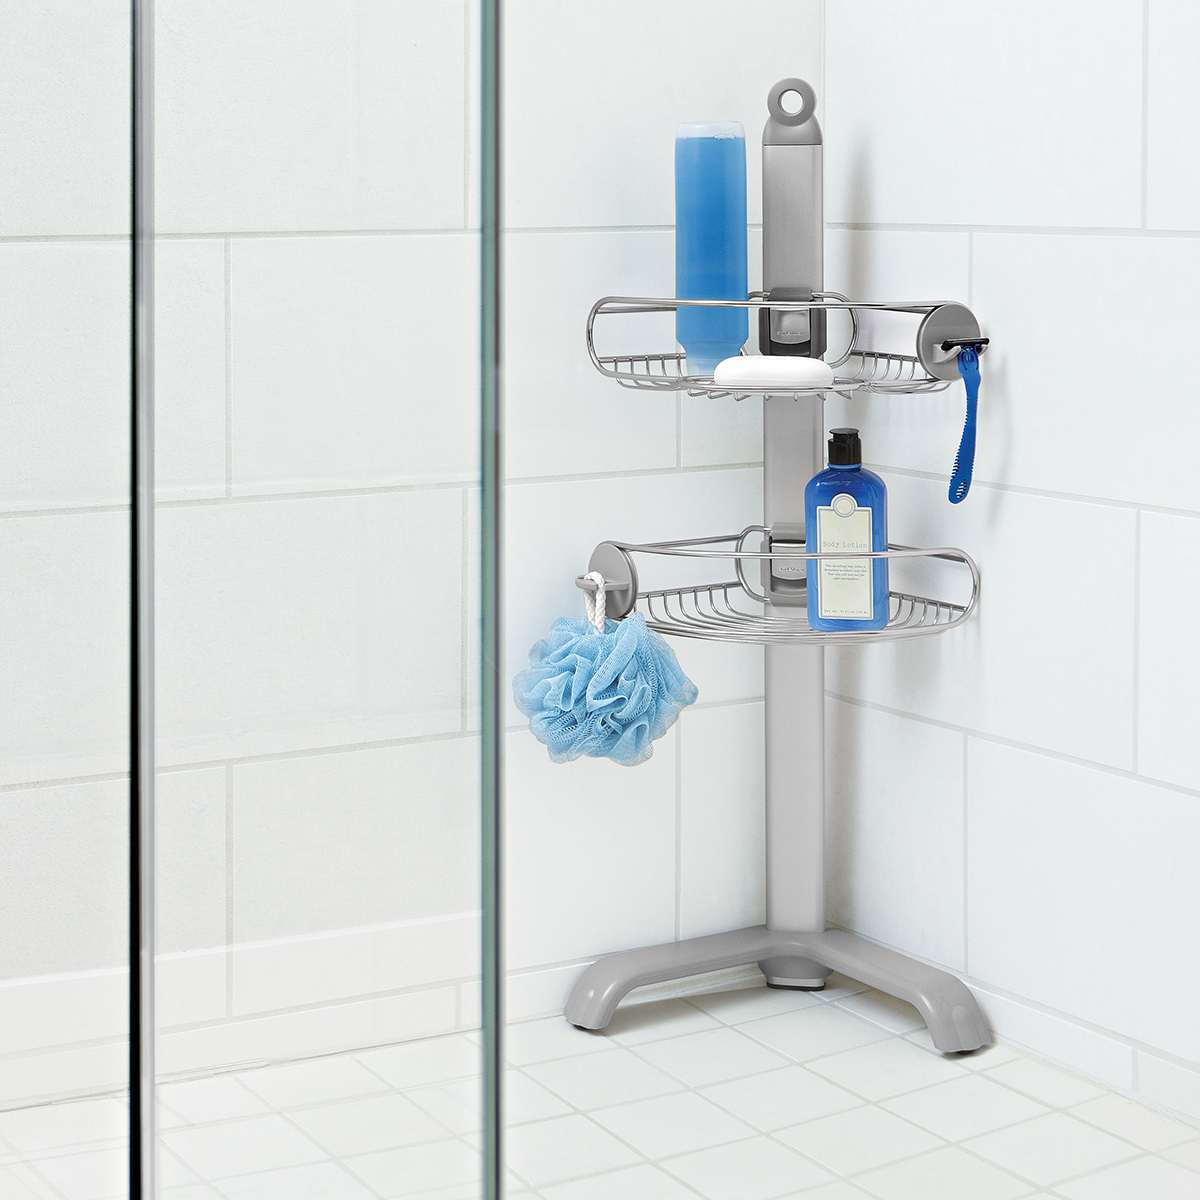 Search Longzon on 👉 ✨Keep your bathroom items dry and organized with  the ventilated and drainage design of Shower Caddy, are SO easy to  install!🙌✨ #cleaning #showershelves #finds #bathroom #organizedhome  #nodrilling #storage #